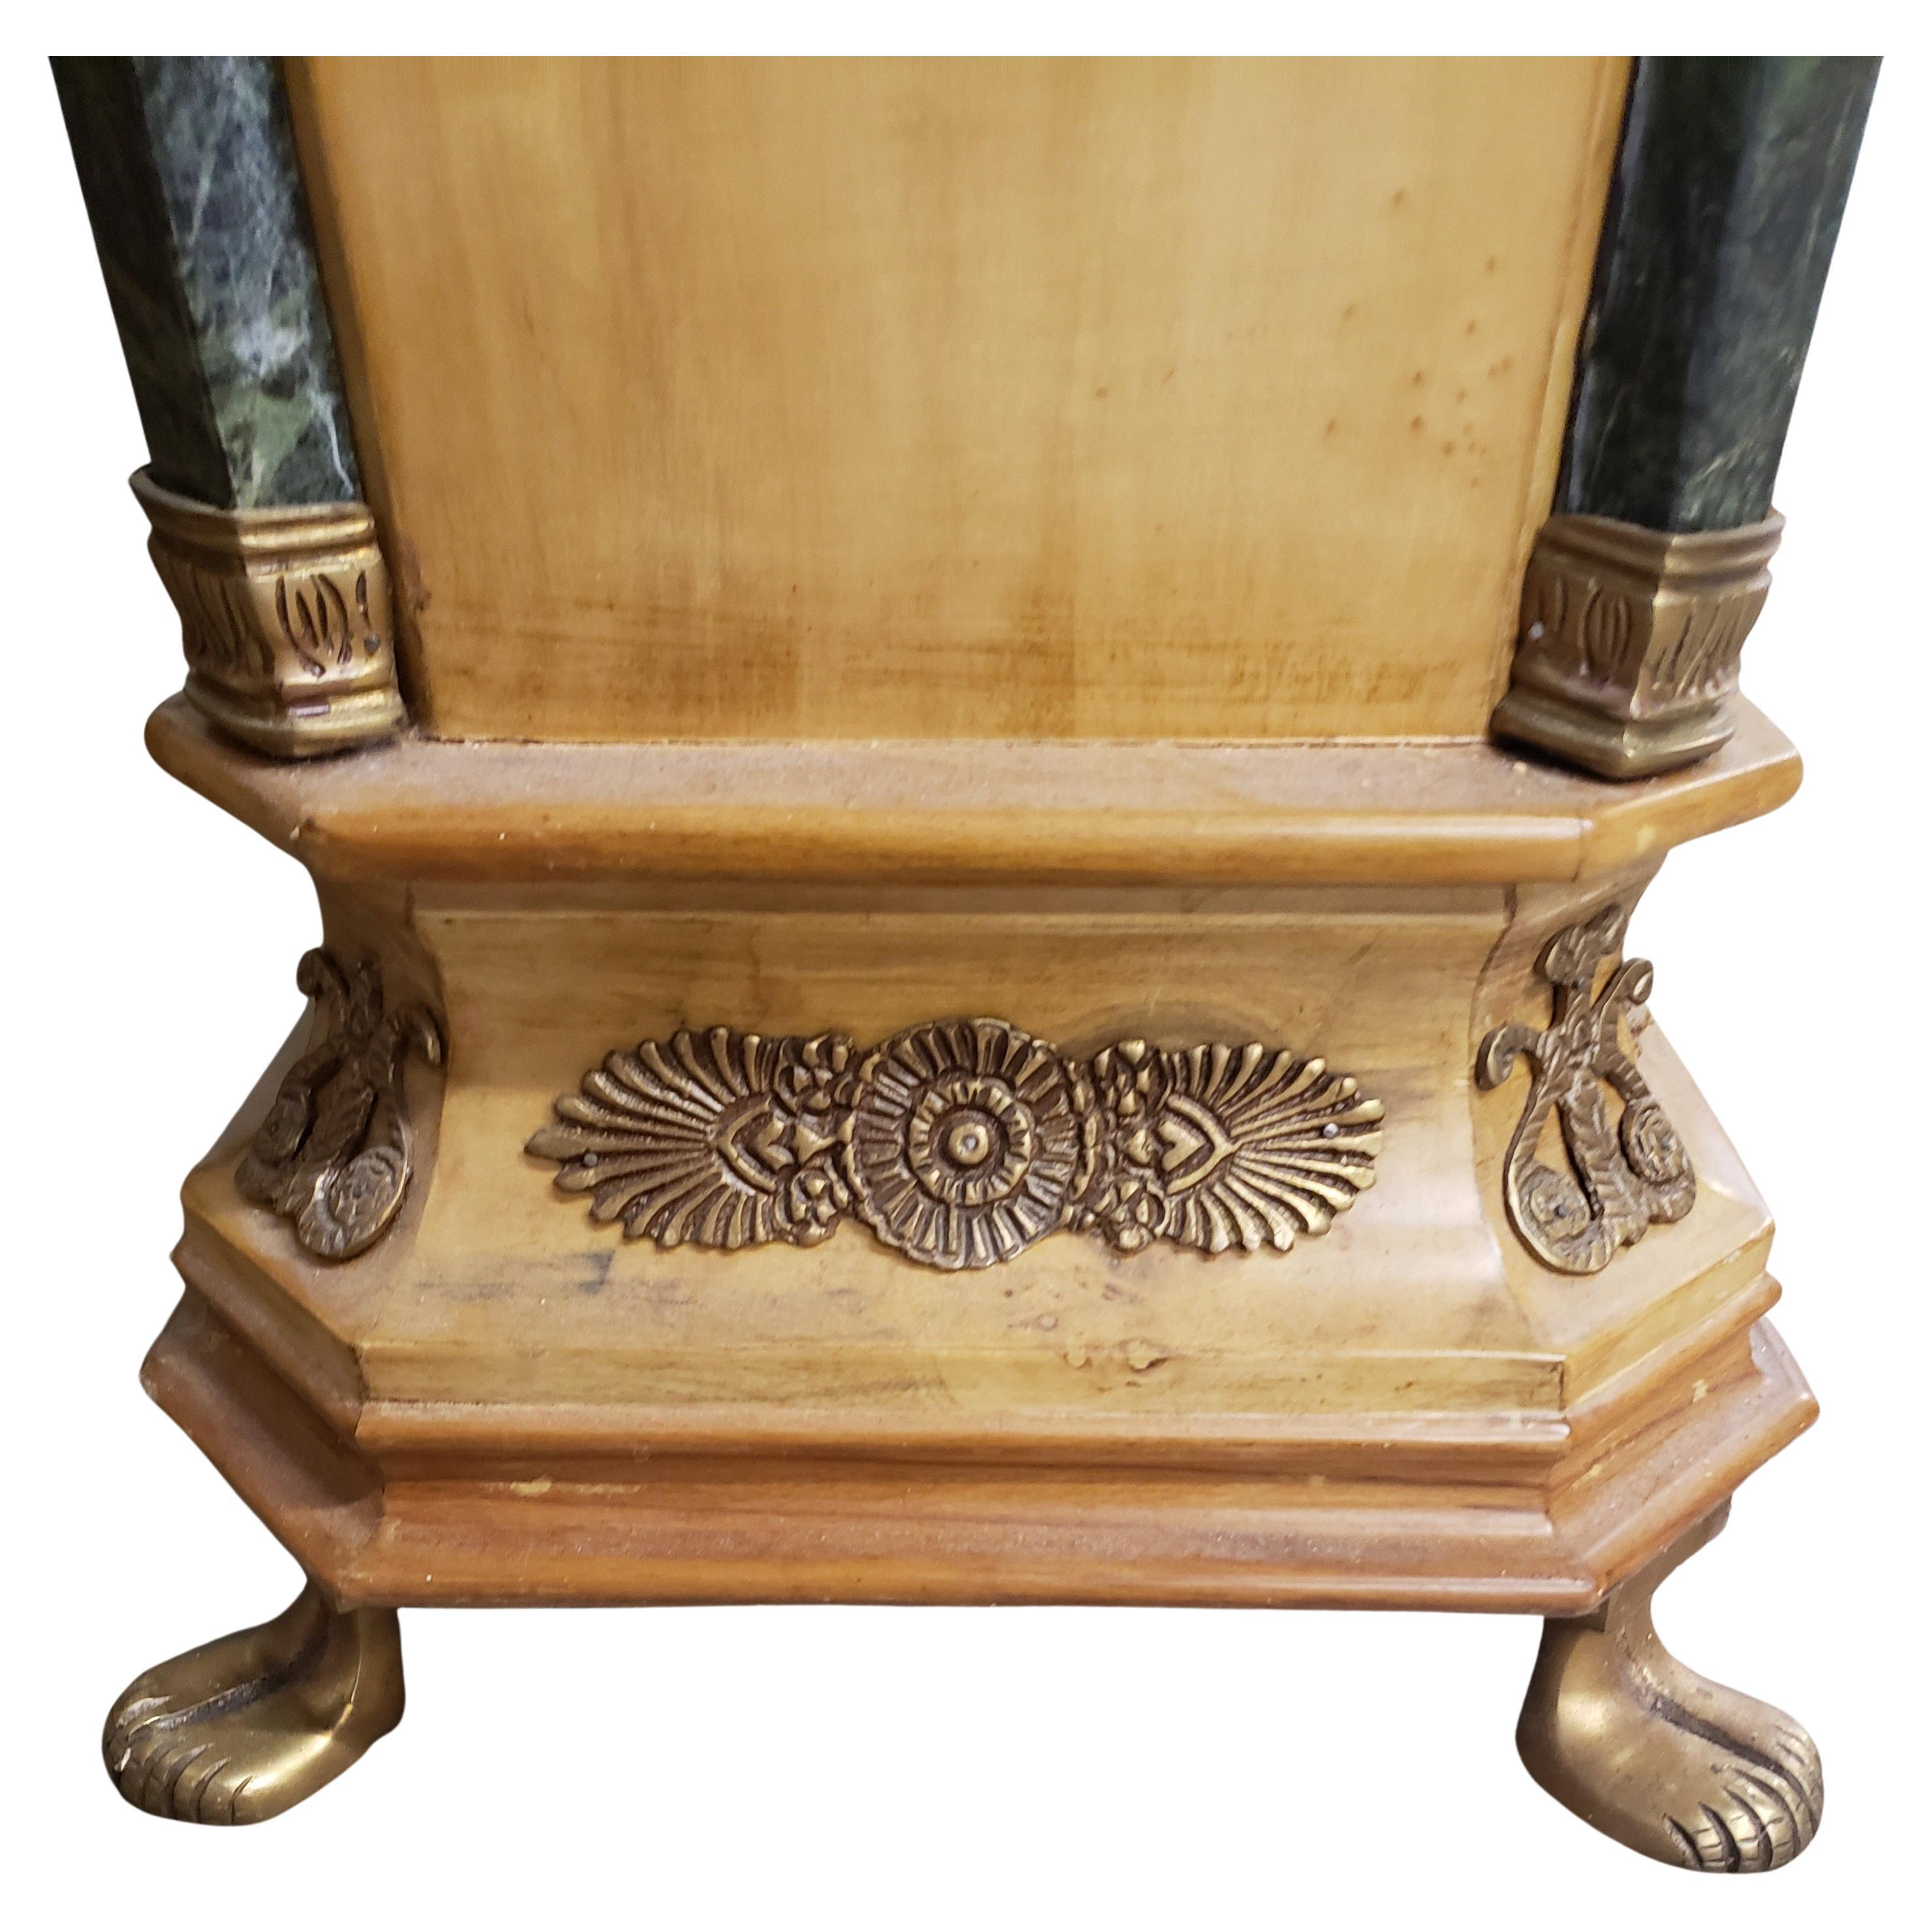 French Empire Gilt Bronze Ormolu Mottled Marble & Satinwood Pedestals, a Pair For Sale 5